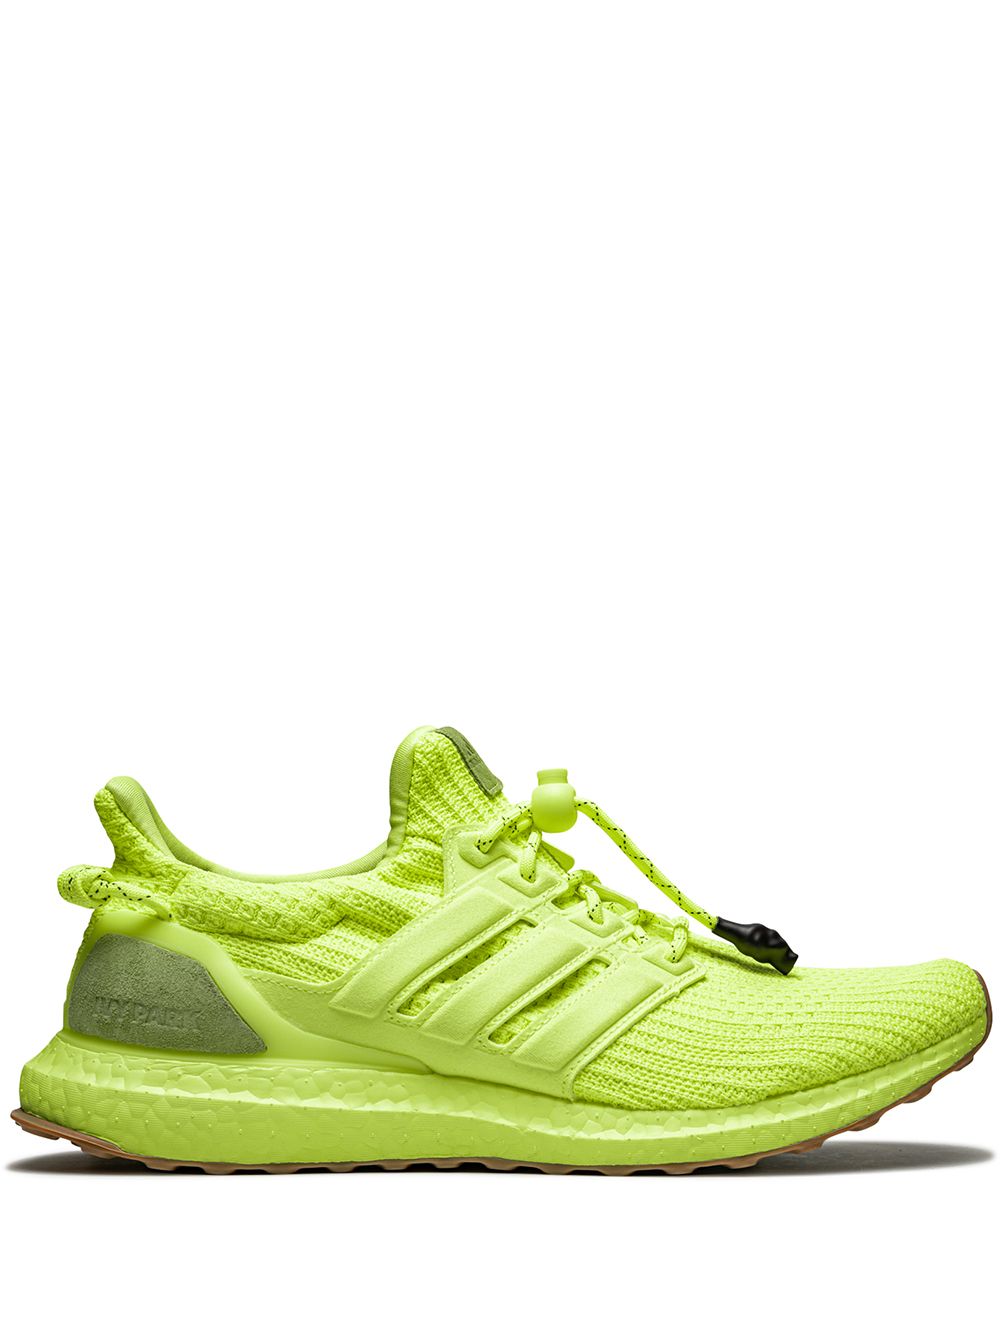 adidas x Ivy Park Ultraboost OG "Hi-Res Yellow" sneakers von adidas